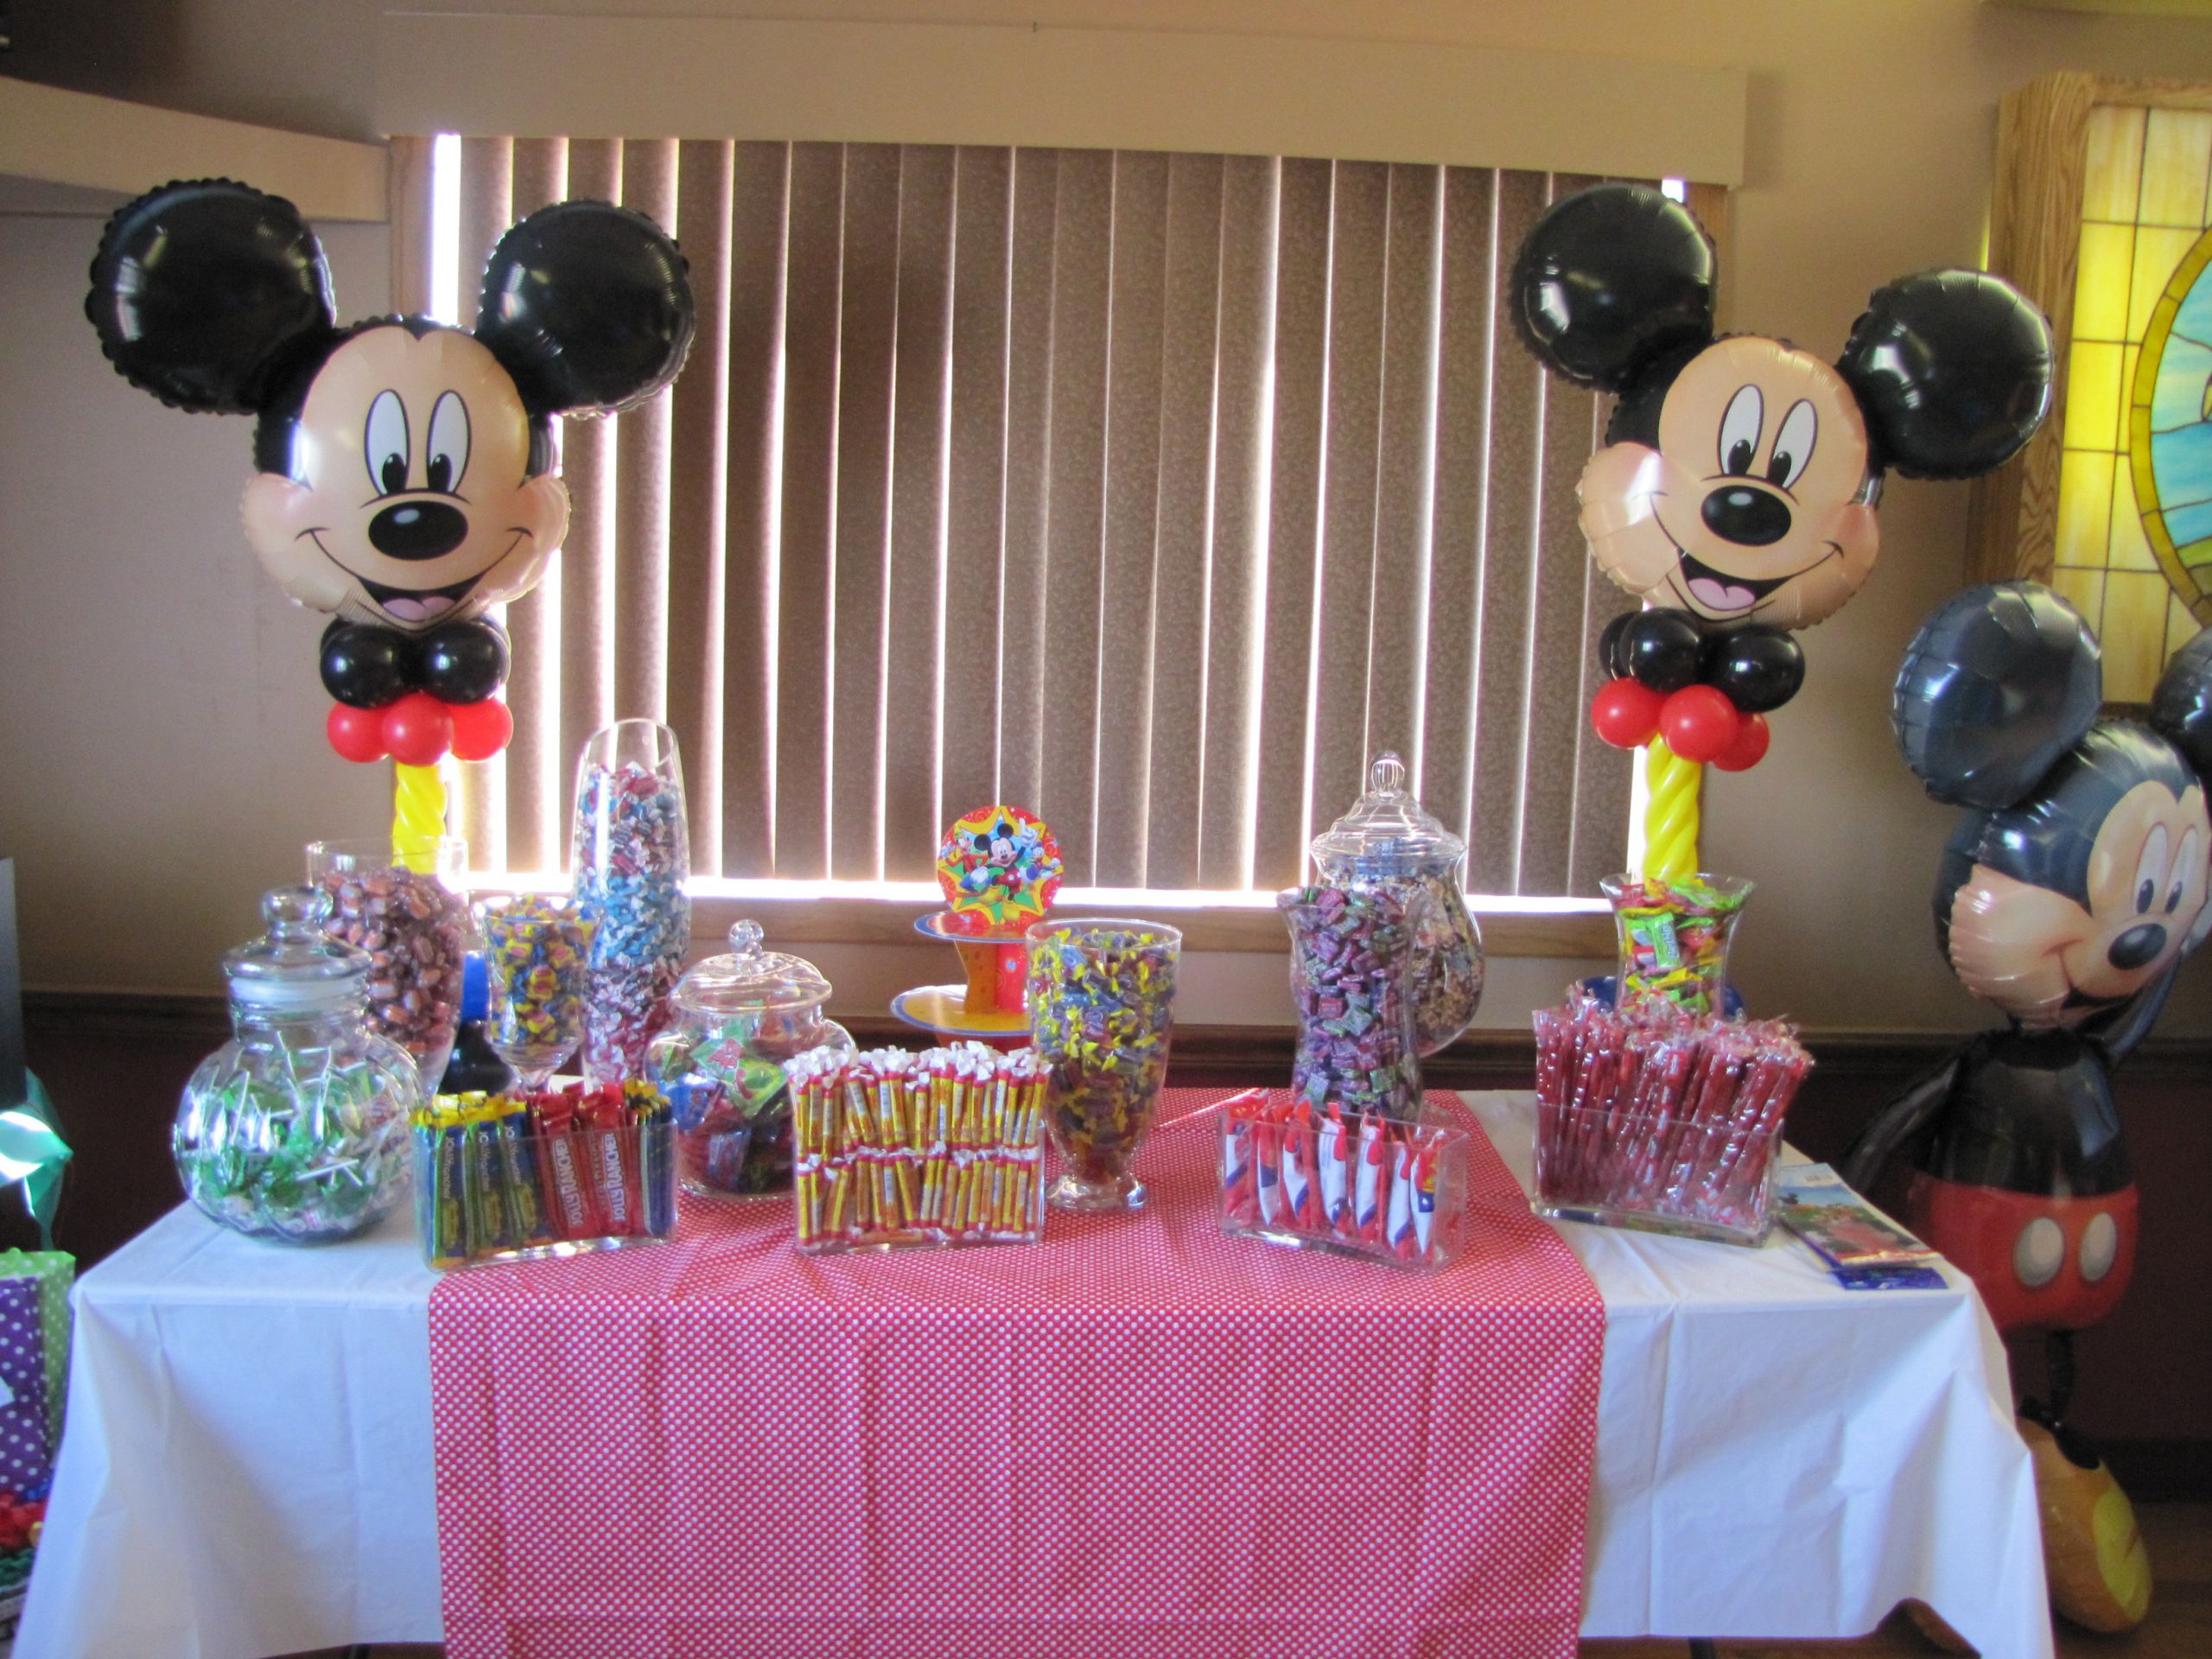 Mickey Mouse Baby Shower Decorations Party City
 Tips Mickey Mouse Party Ideas For Your Great Birthday